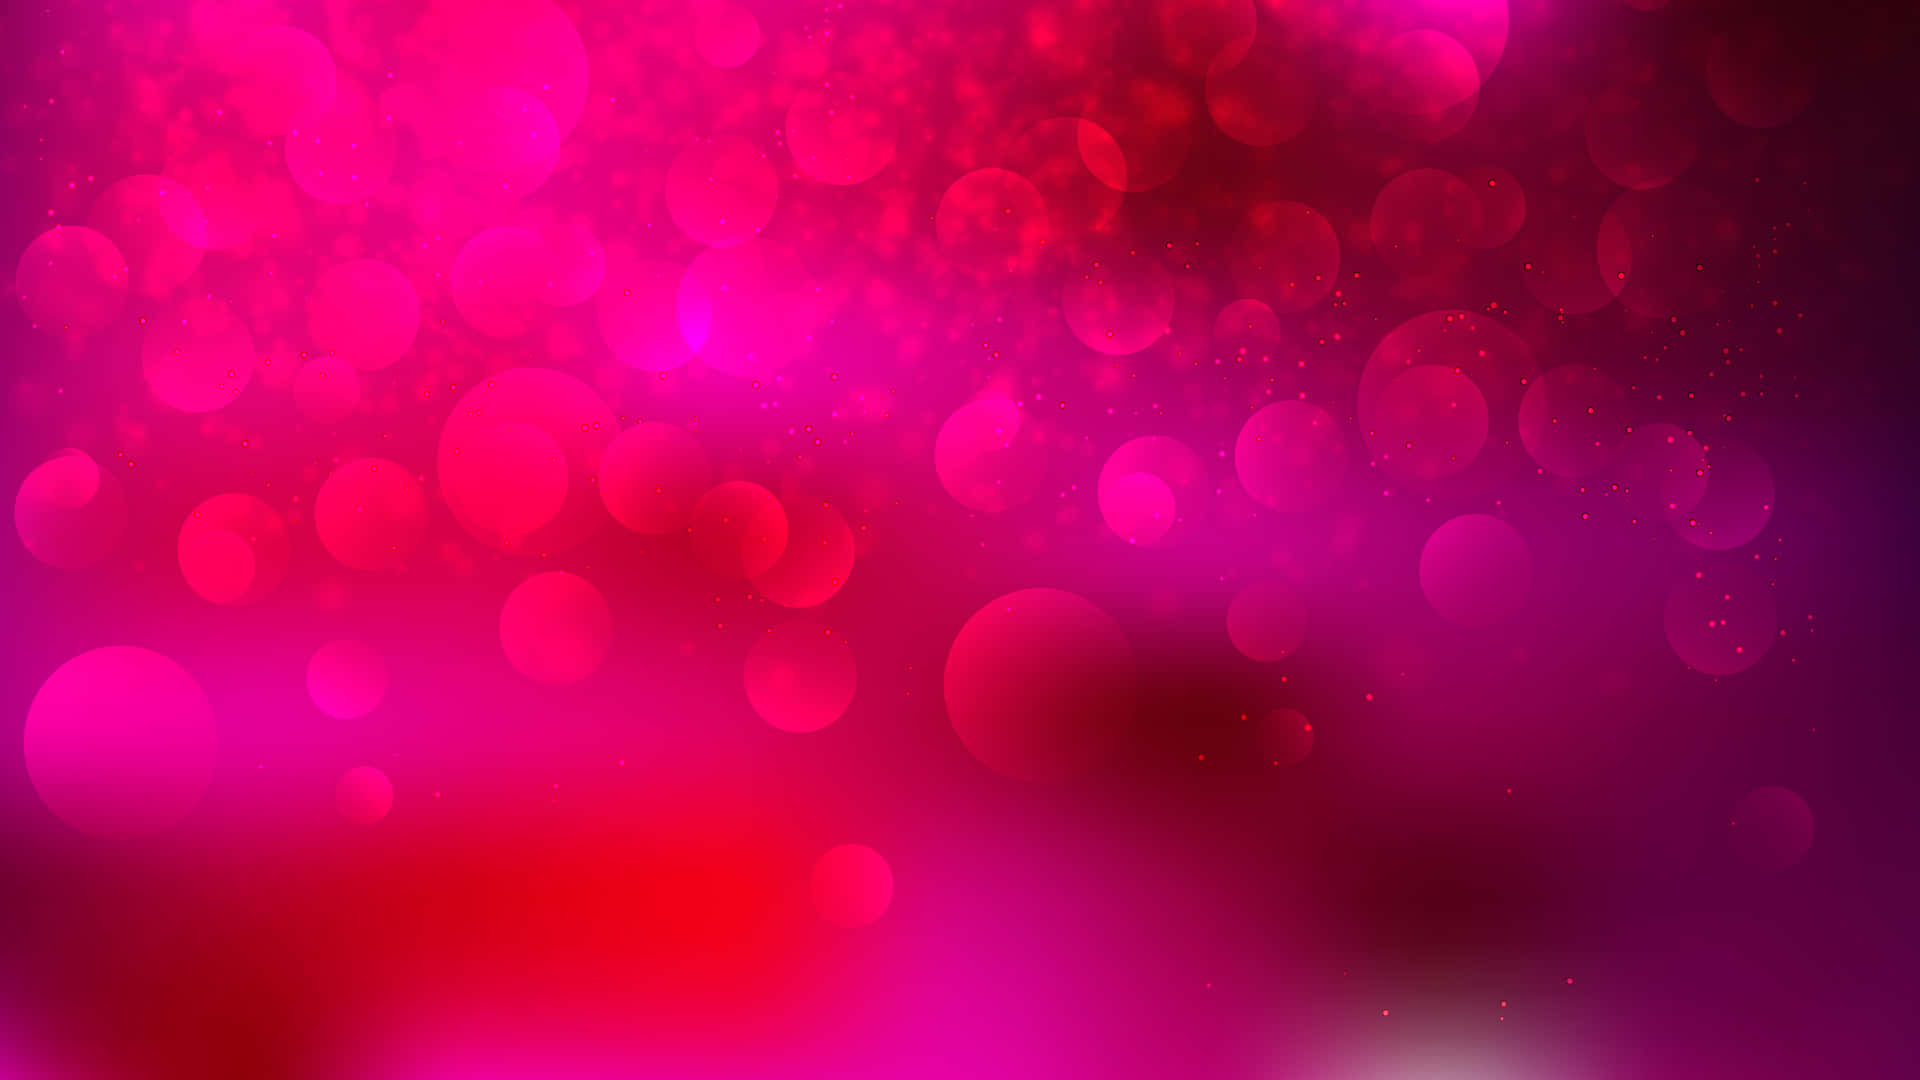 A Beautiful Dark Pink Background guaranteed to brighten up any Room!